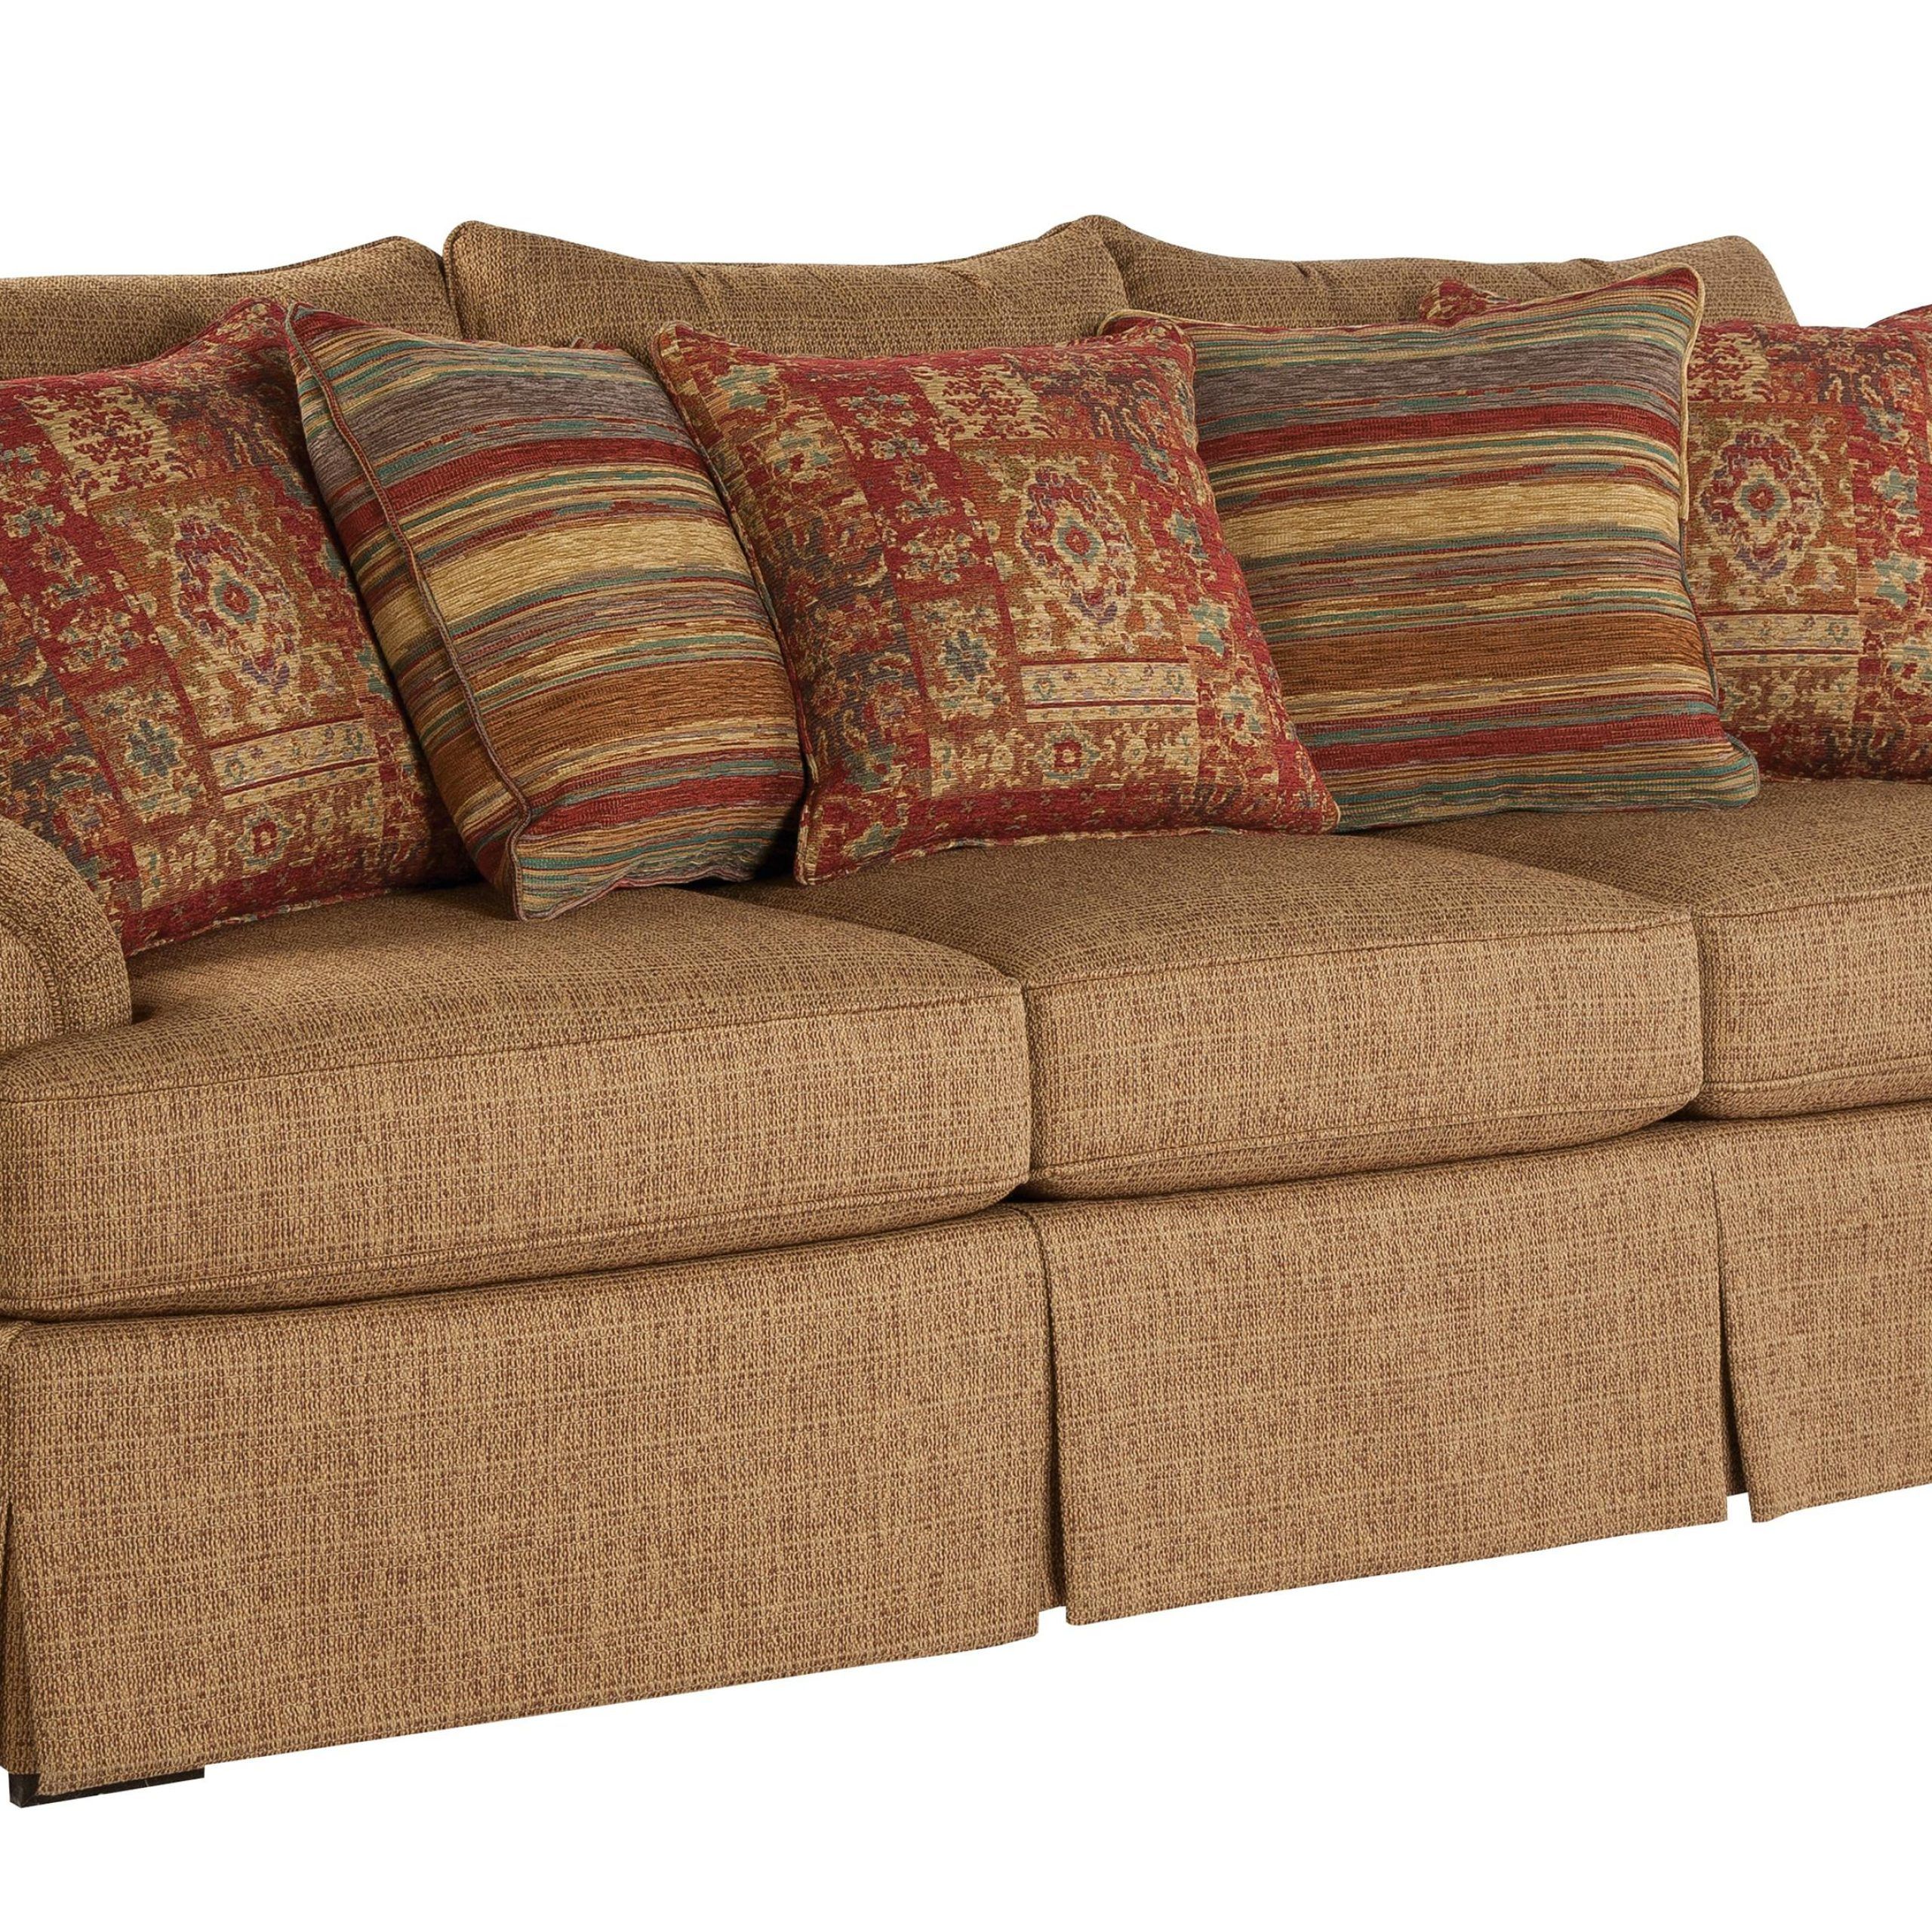 Hickory Craft 9275 Loose Pillow Back Sofa With Rolled Arms And Skirt Throughout Sofas With Pillowback Wood Bases (Gallery 1 of 20)